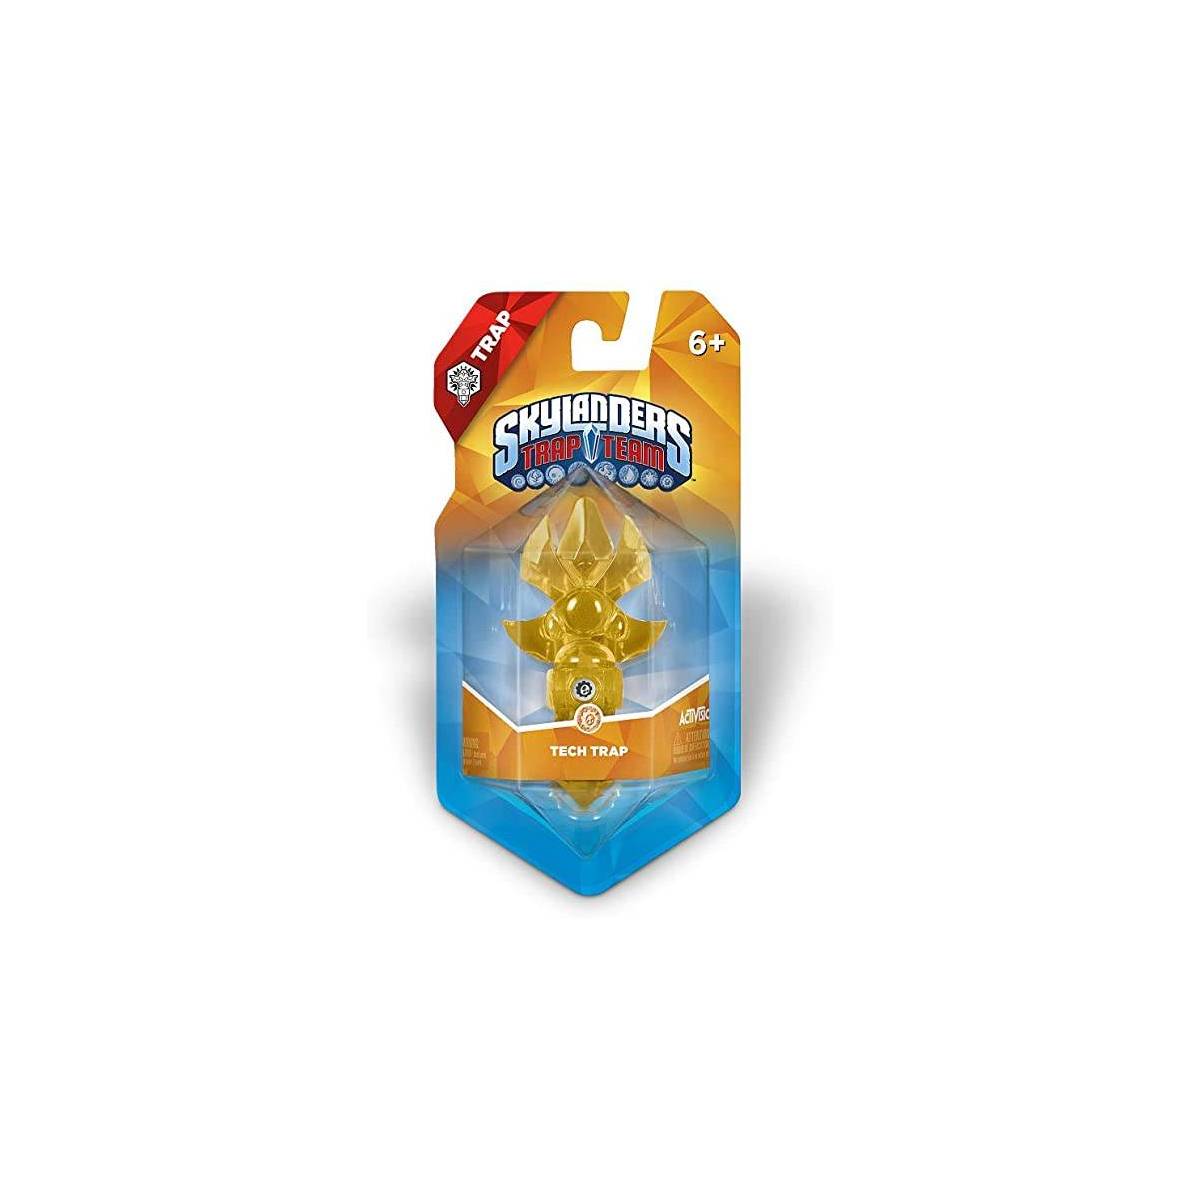 Skylanders Trap Team: Trap - Tech (Design May Vary) [Not Machine Specific]